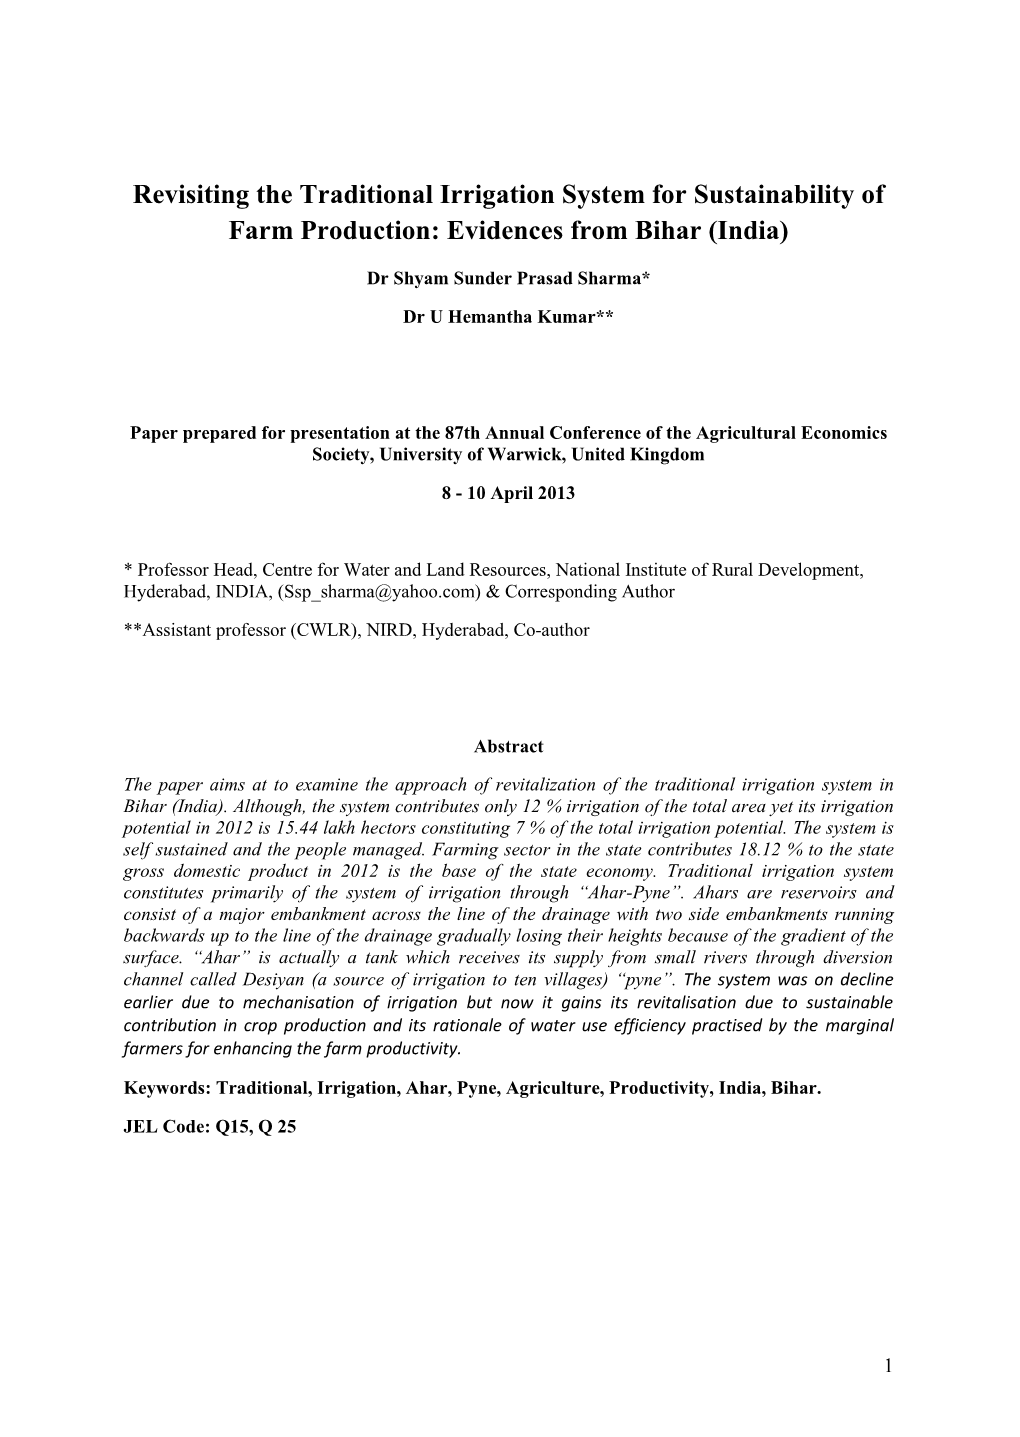 Revisiting the Traditional Irrigation System for Sustainability of Farm Production: Evidences from Bihar (India)